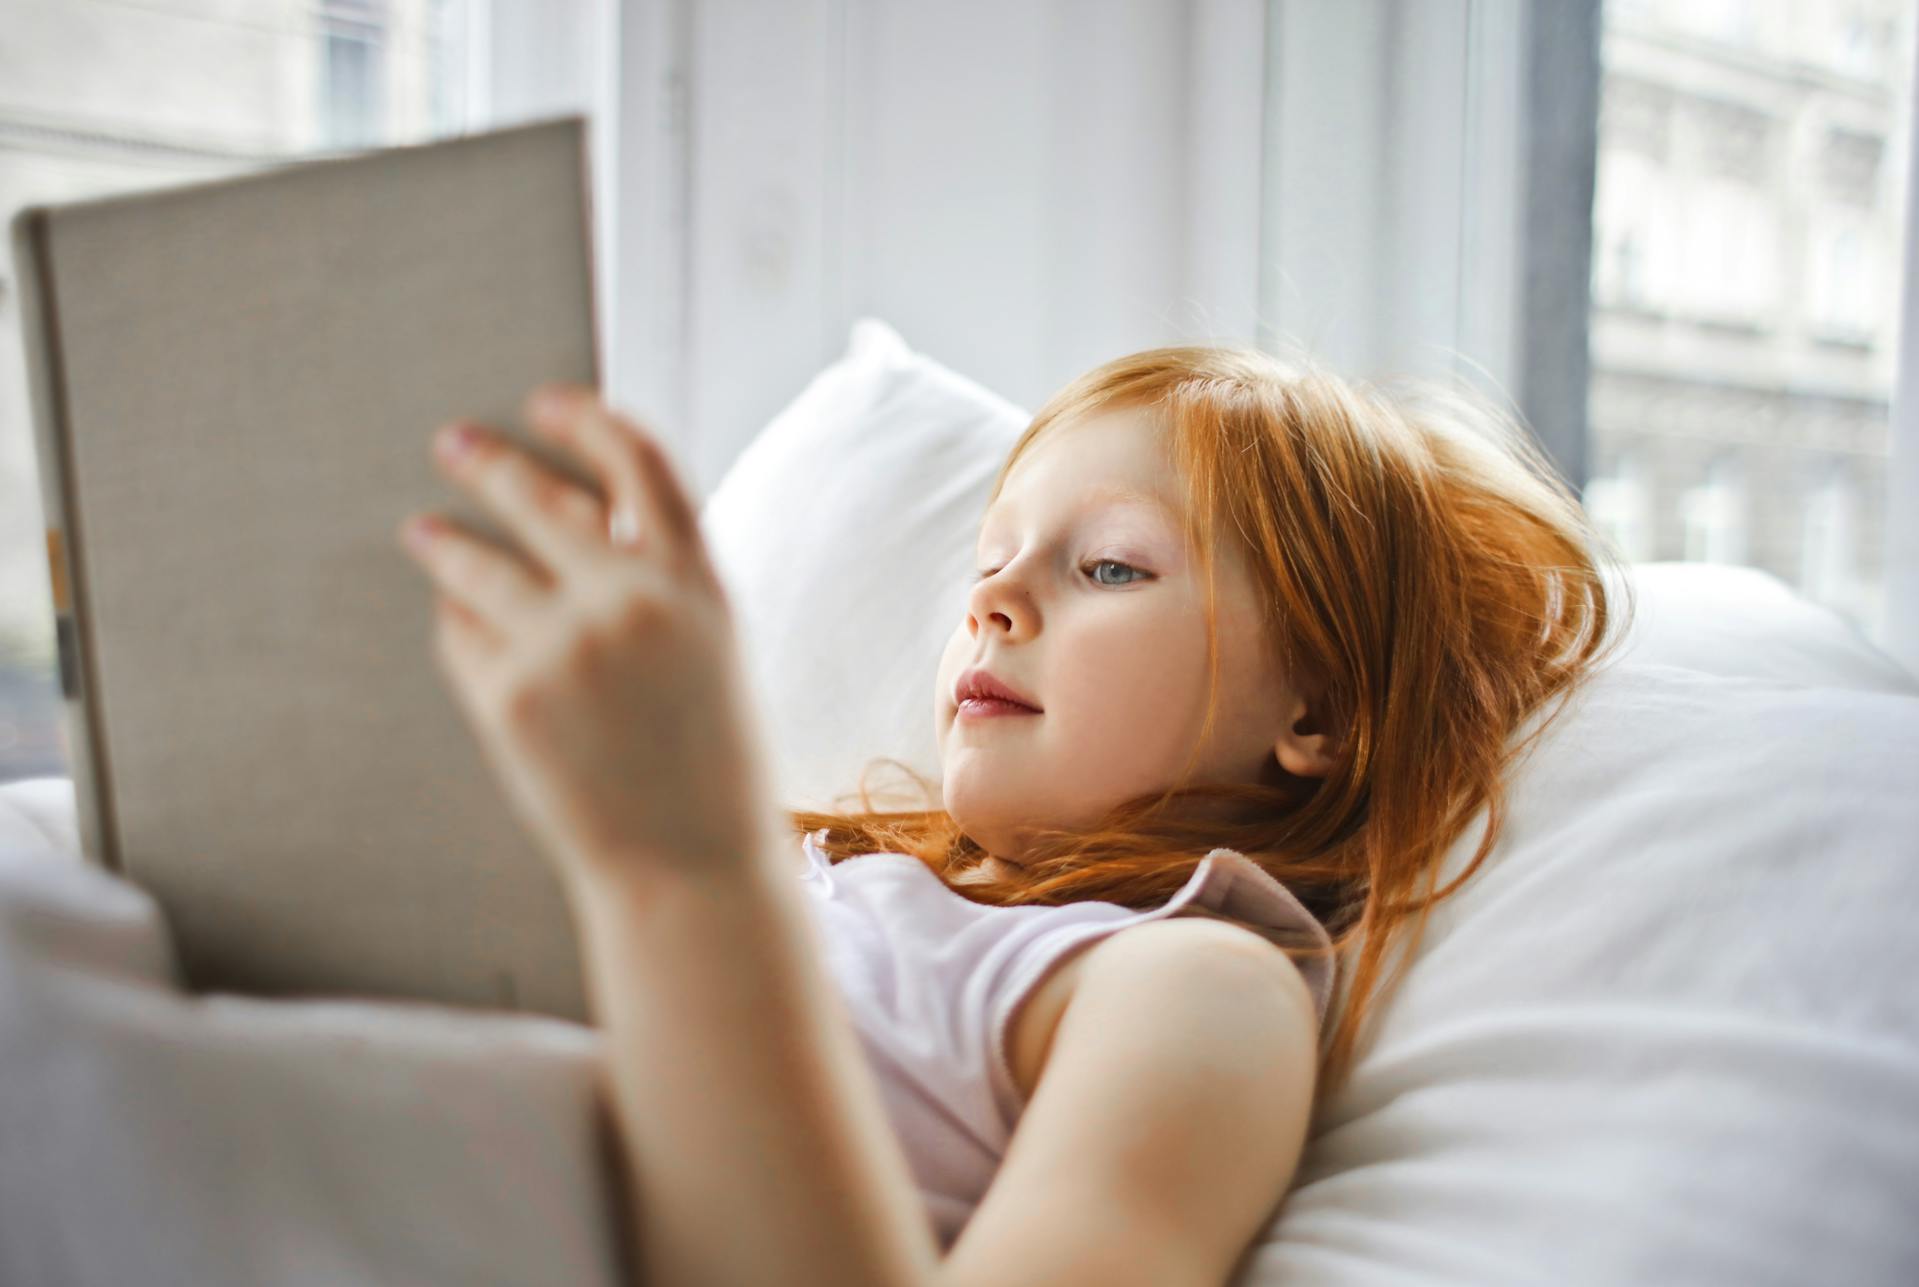 A little girl holding a book in bed | Source: Pexels